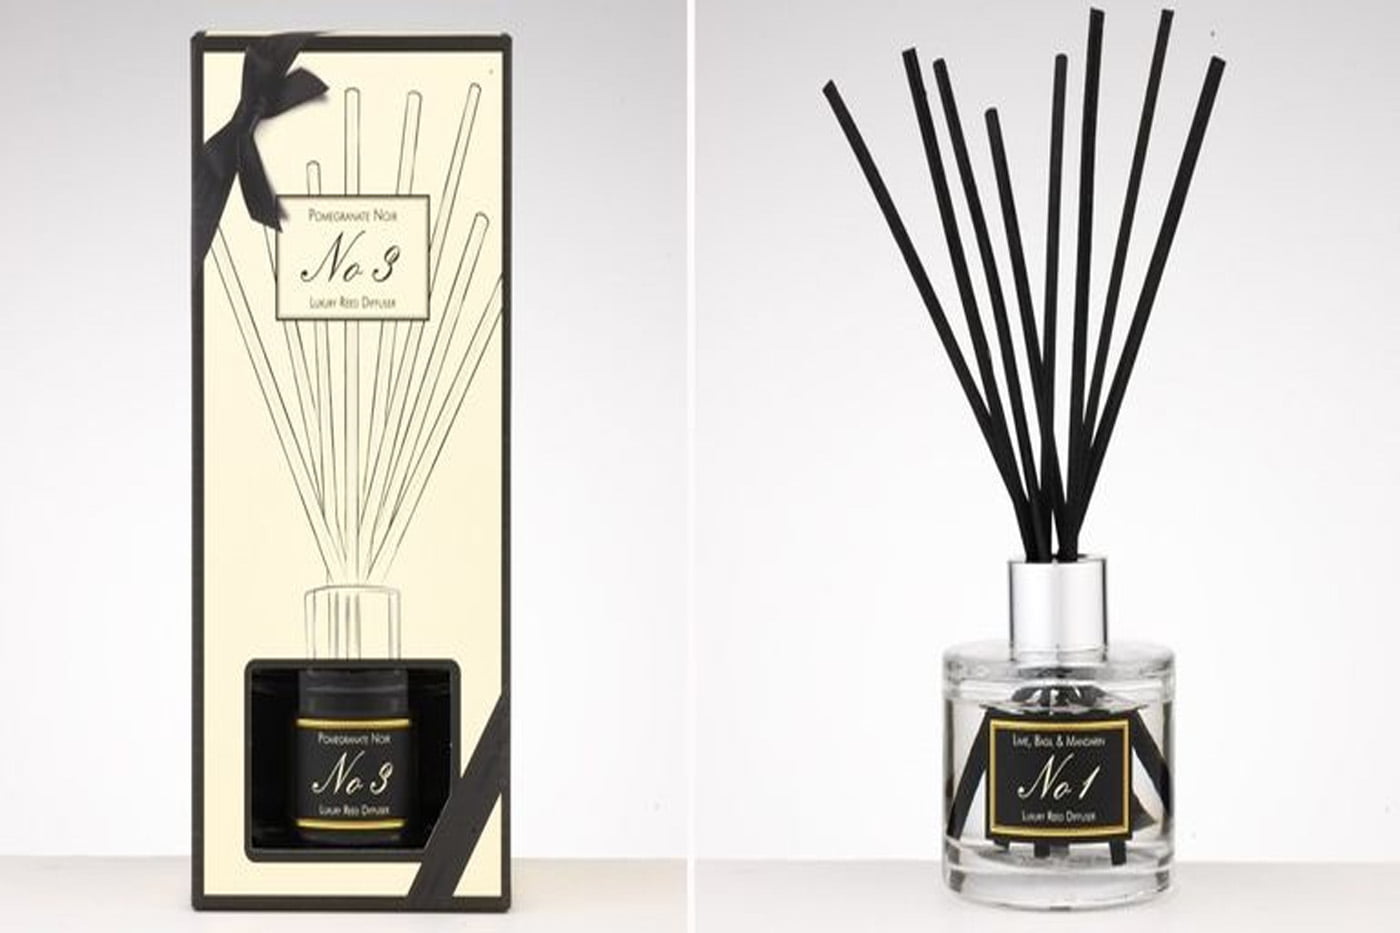 Aldi has Jo Malone-Style Dupe Reed Diffusers for £3.99!